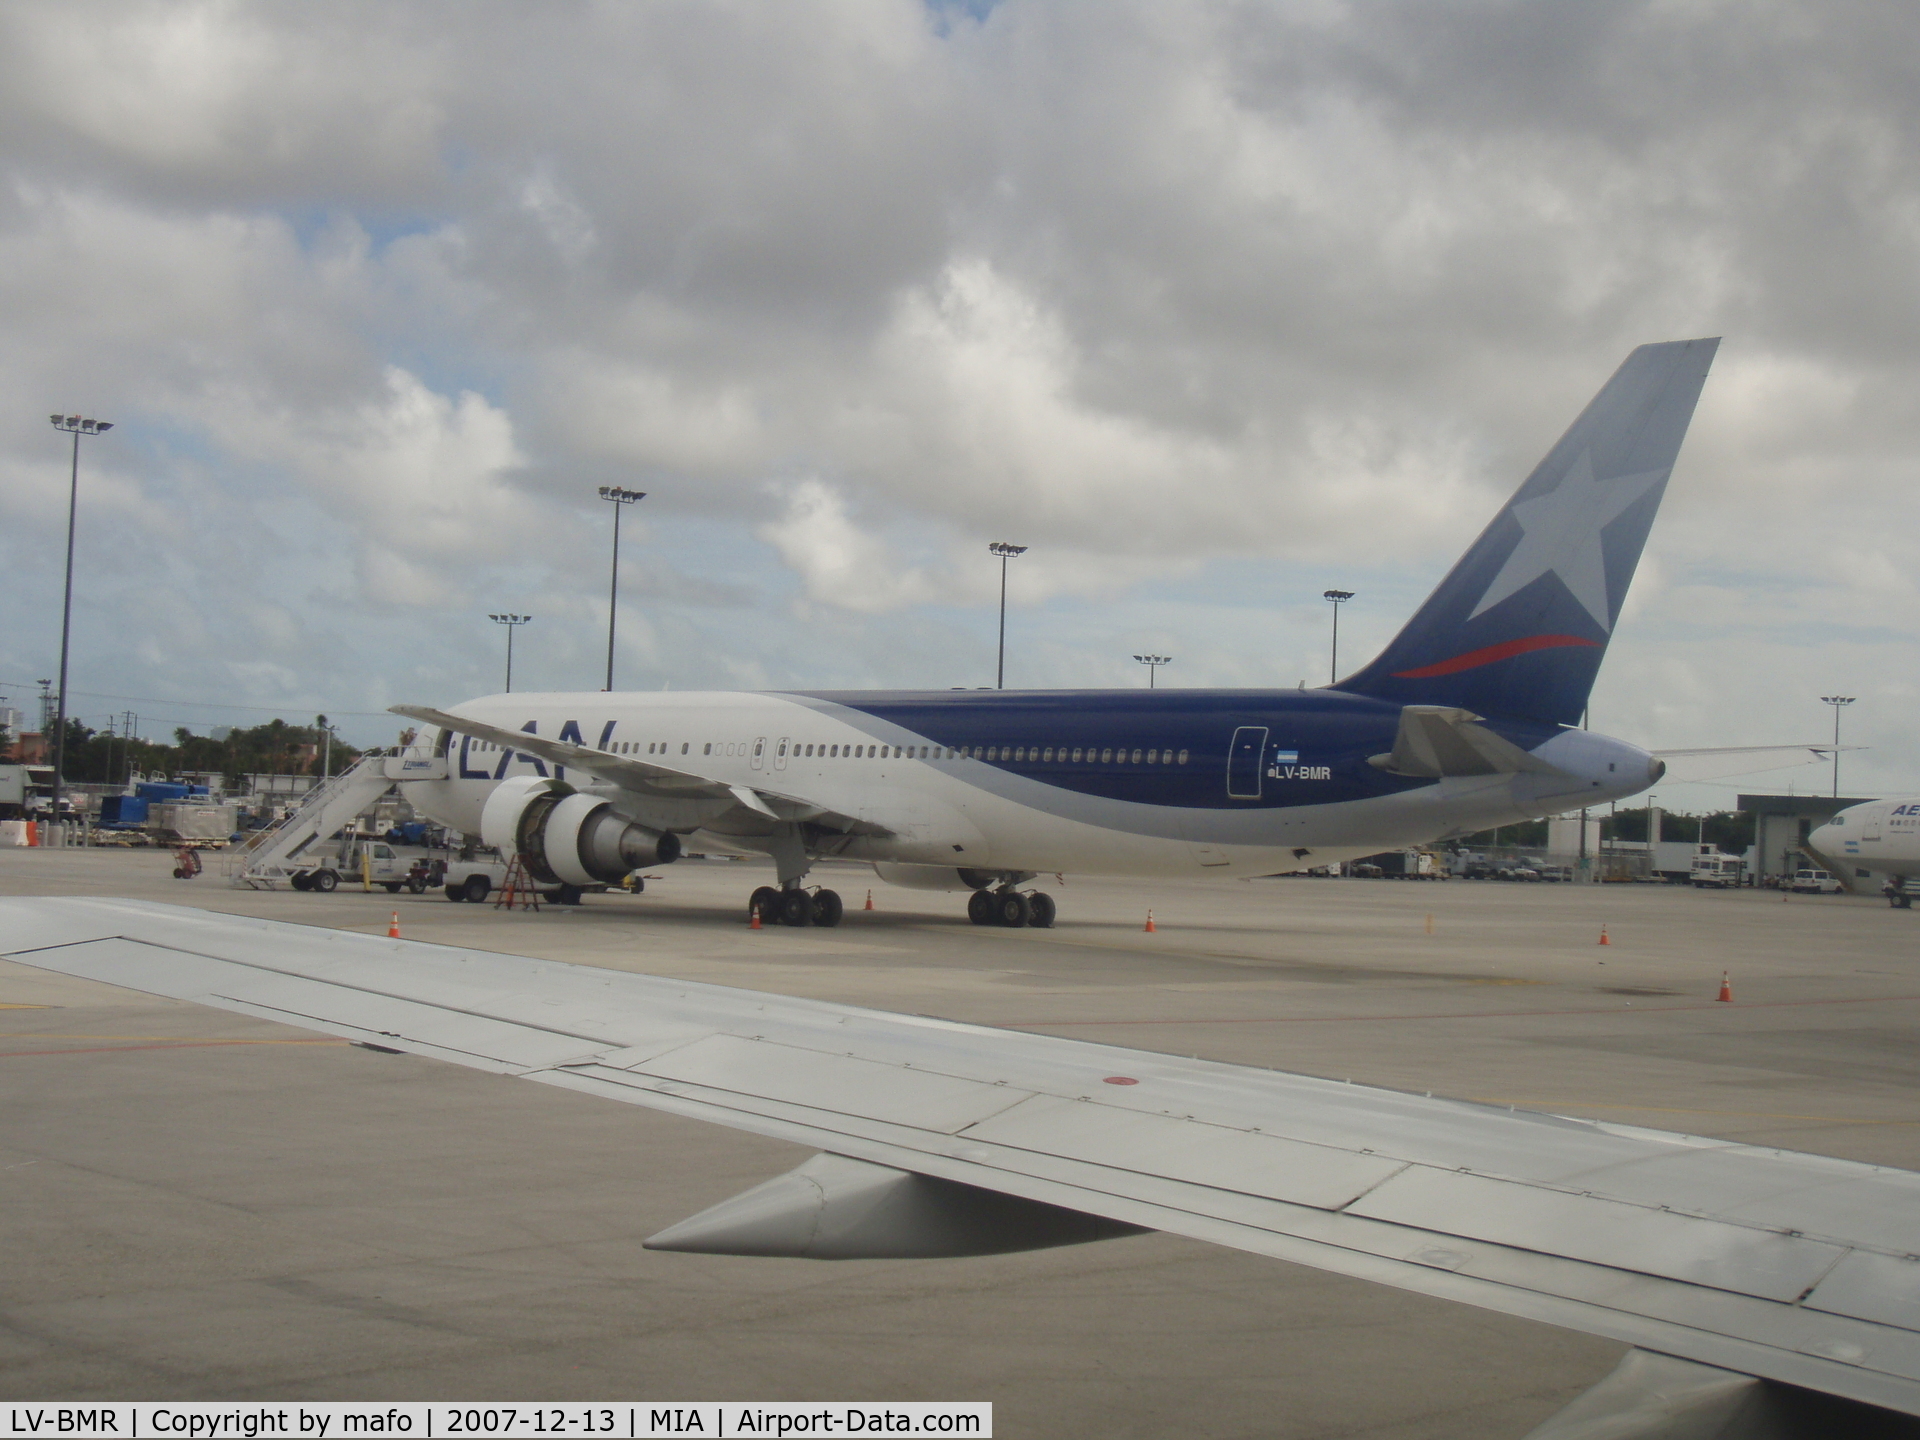 LV-BMR, 1996 Boeing 767-316/ER C/N 26329, Standing at Miami airport